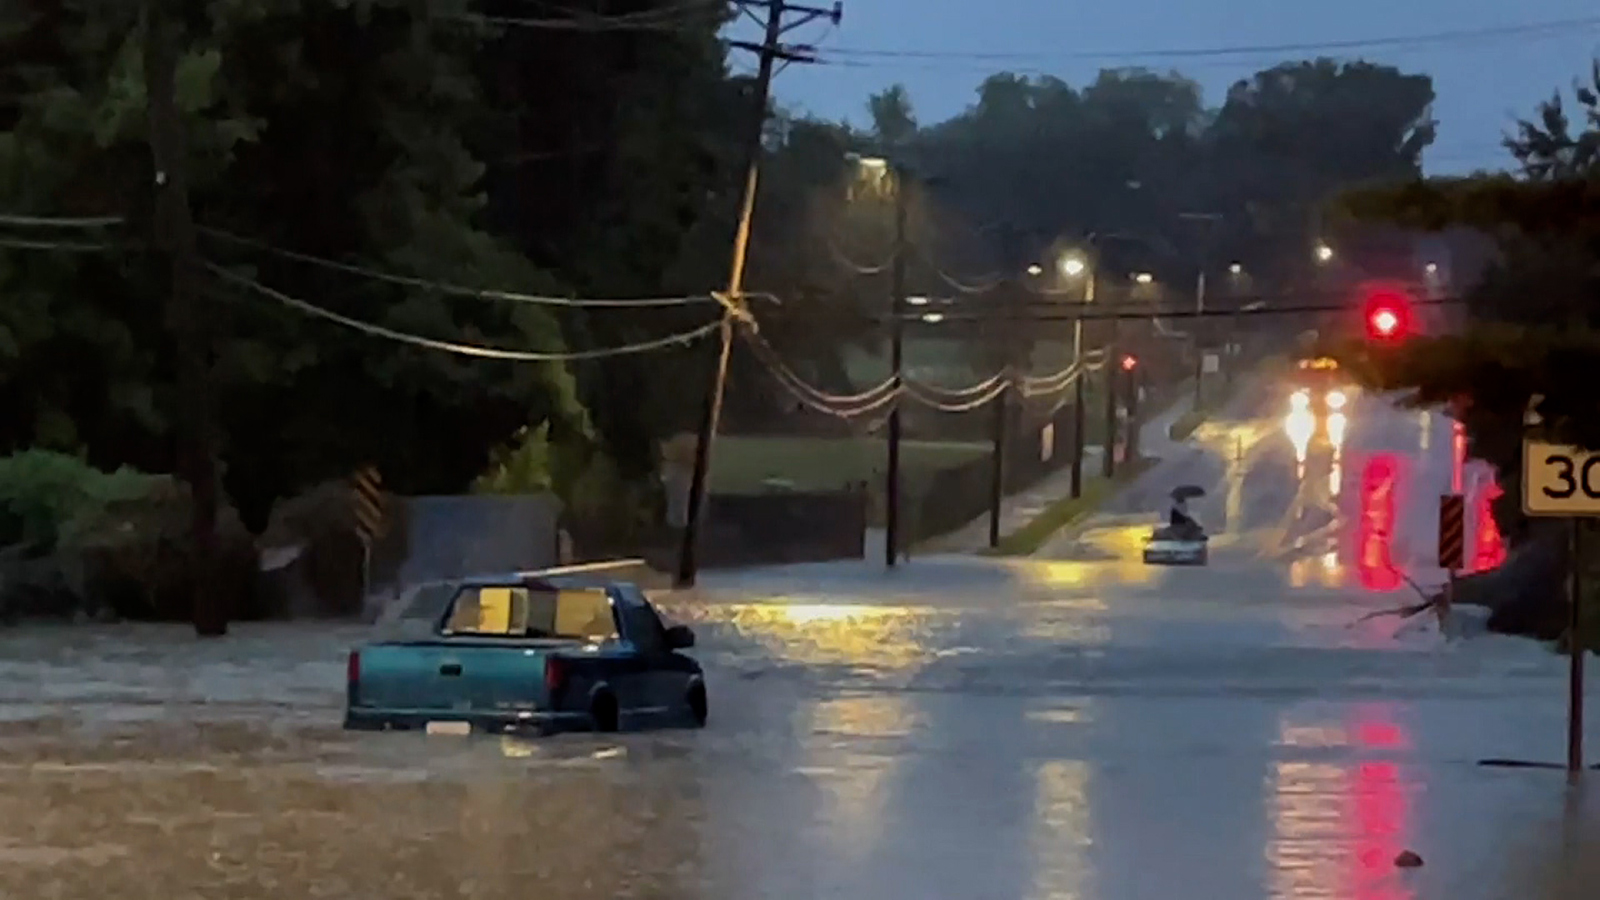 At least 1 killed as record rainfall causes widespread flash flooding in St. Louis area